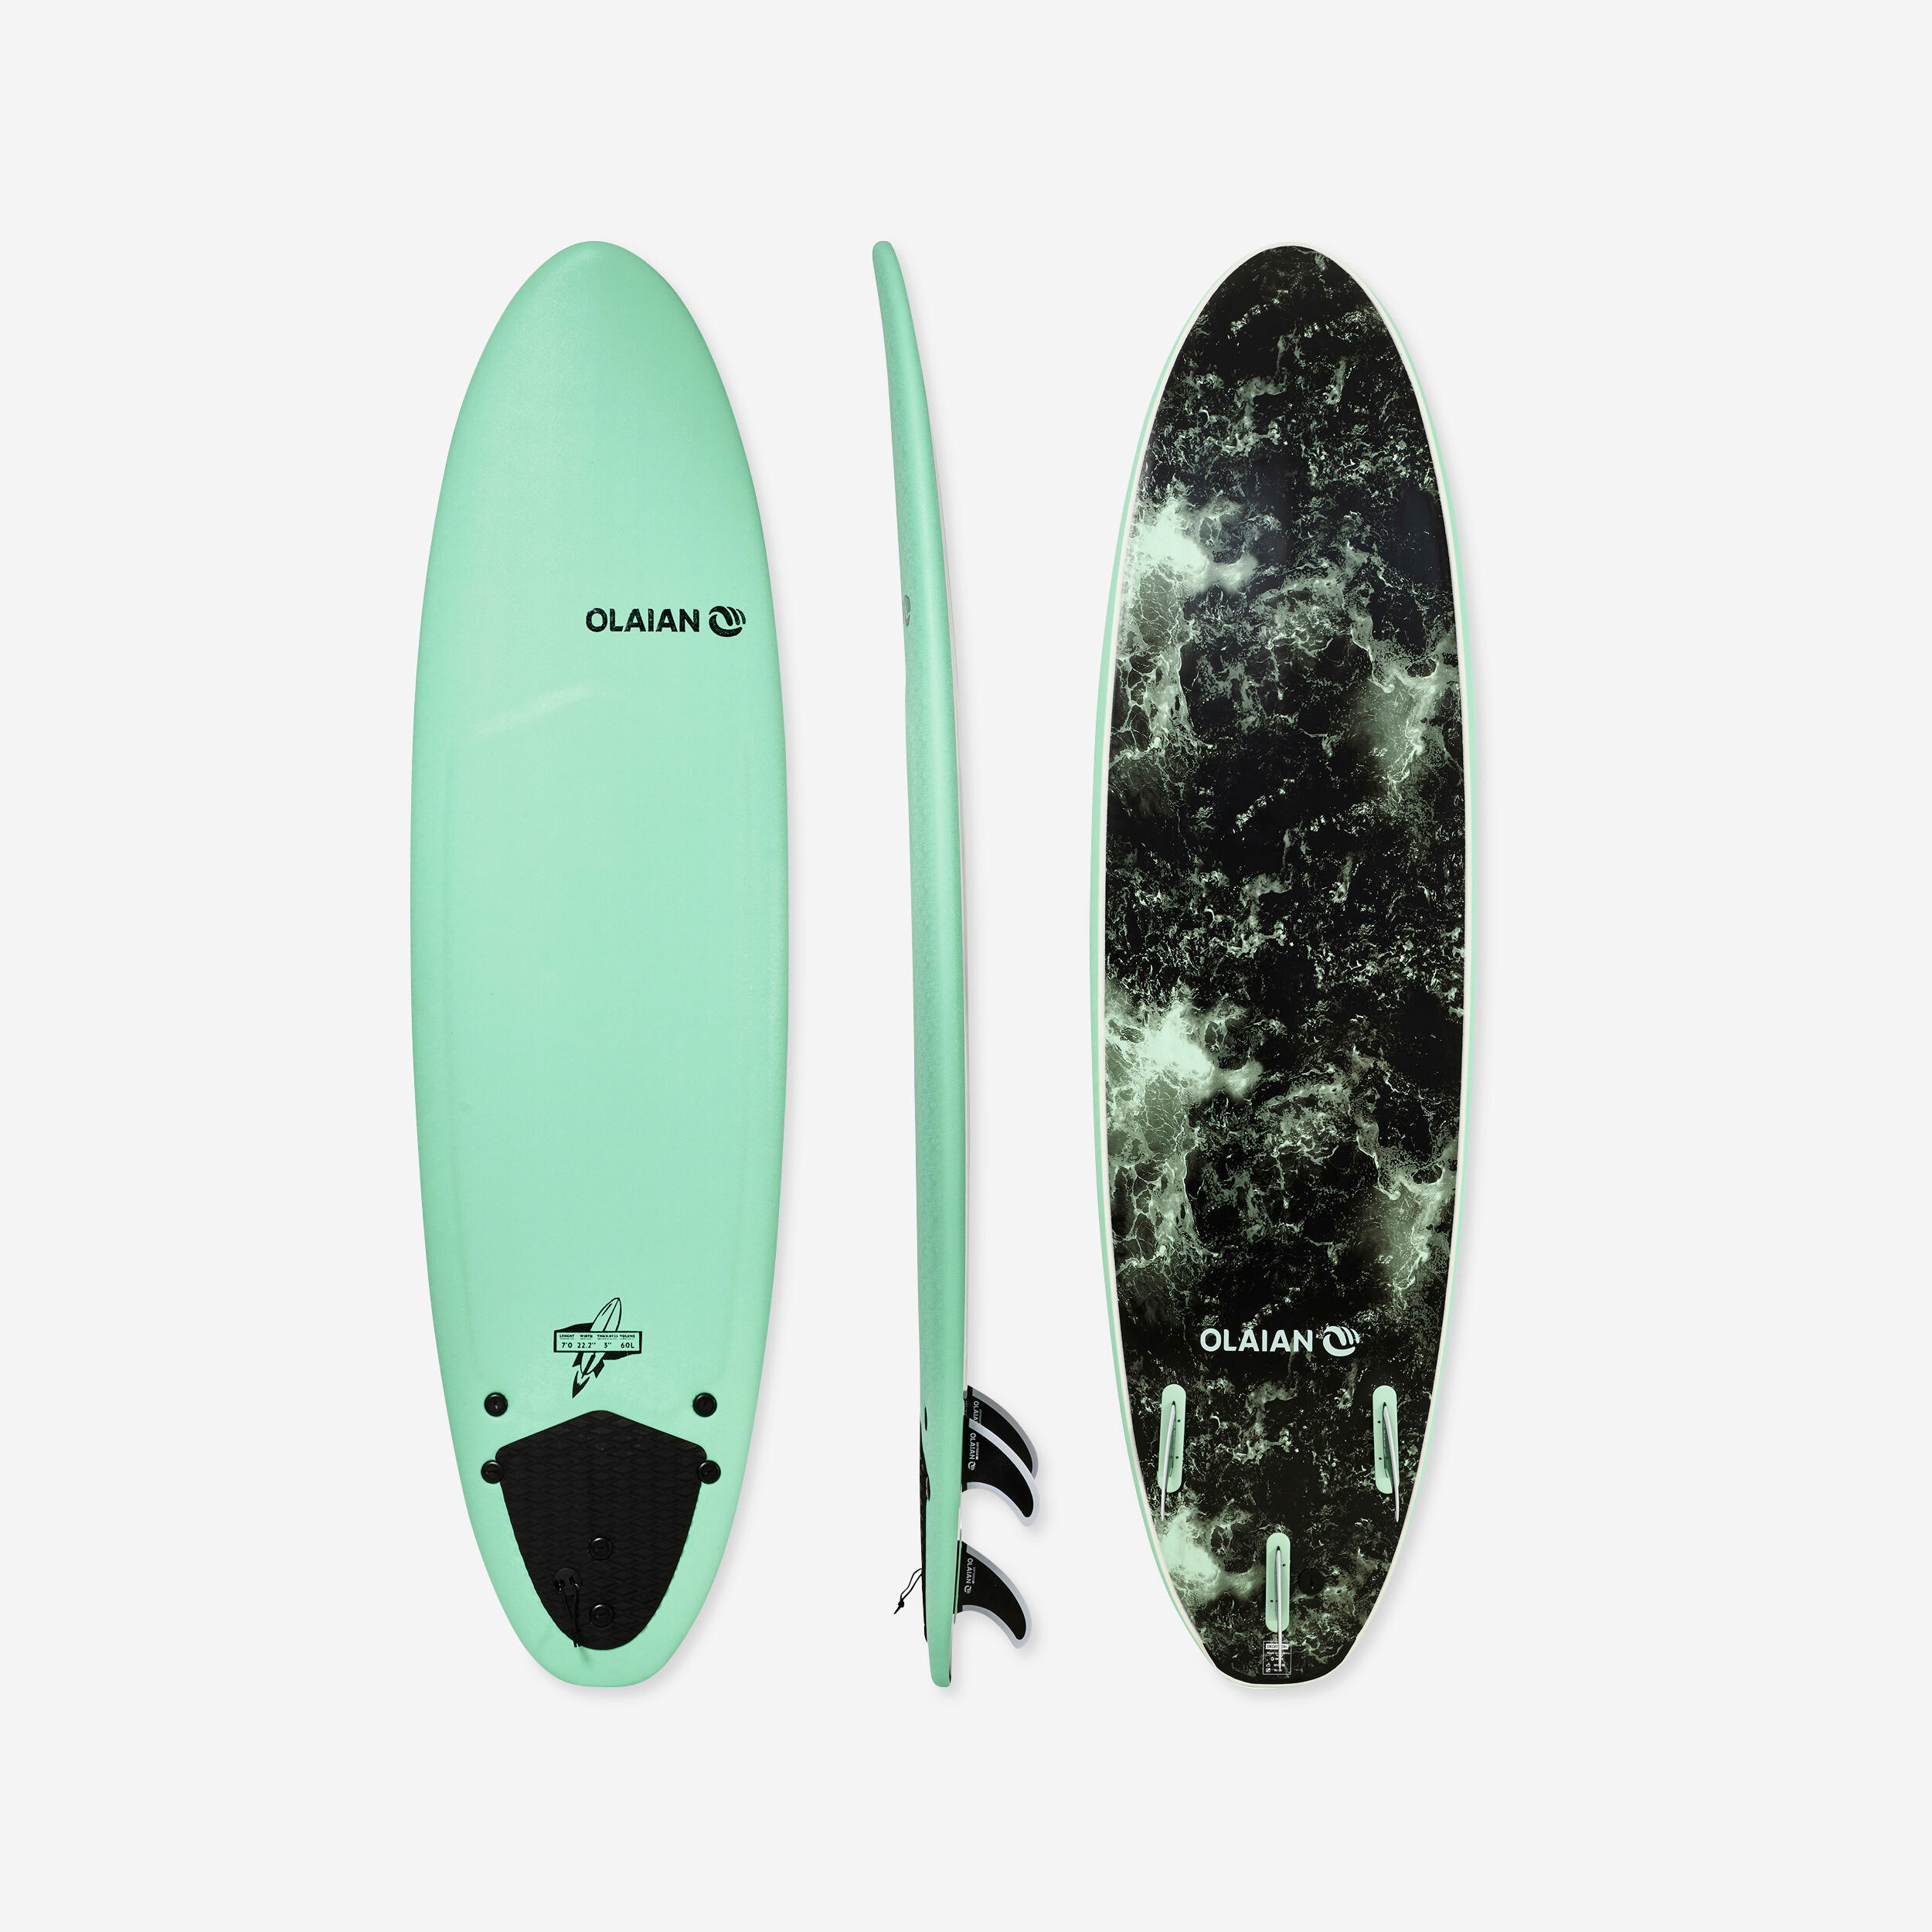 900 Foam Surfboard 7'. Comes with 3 